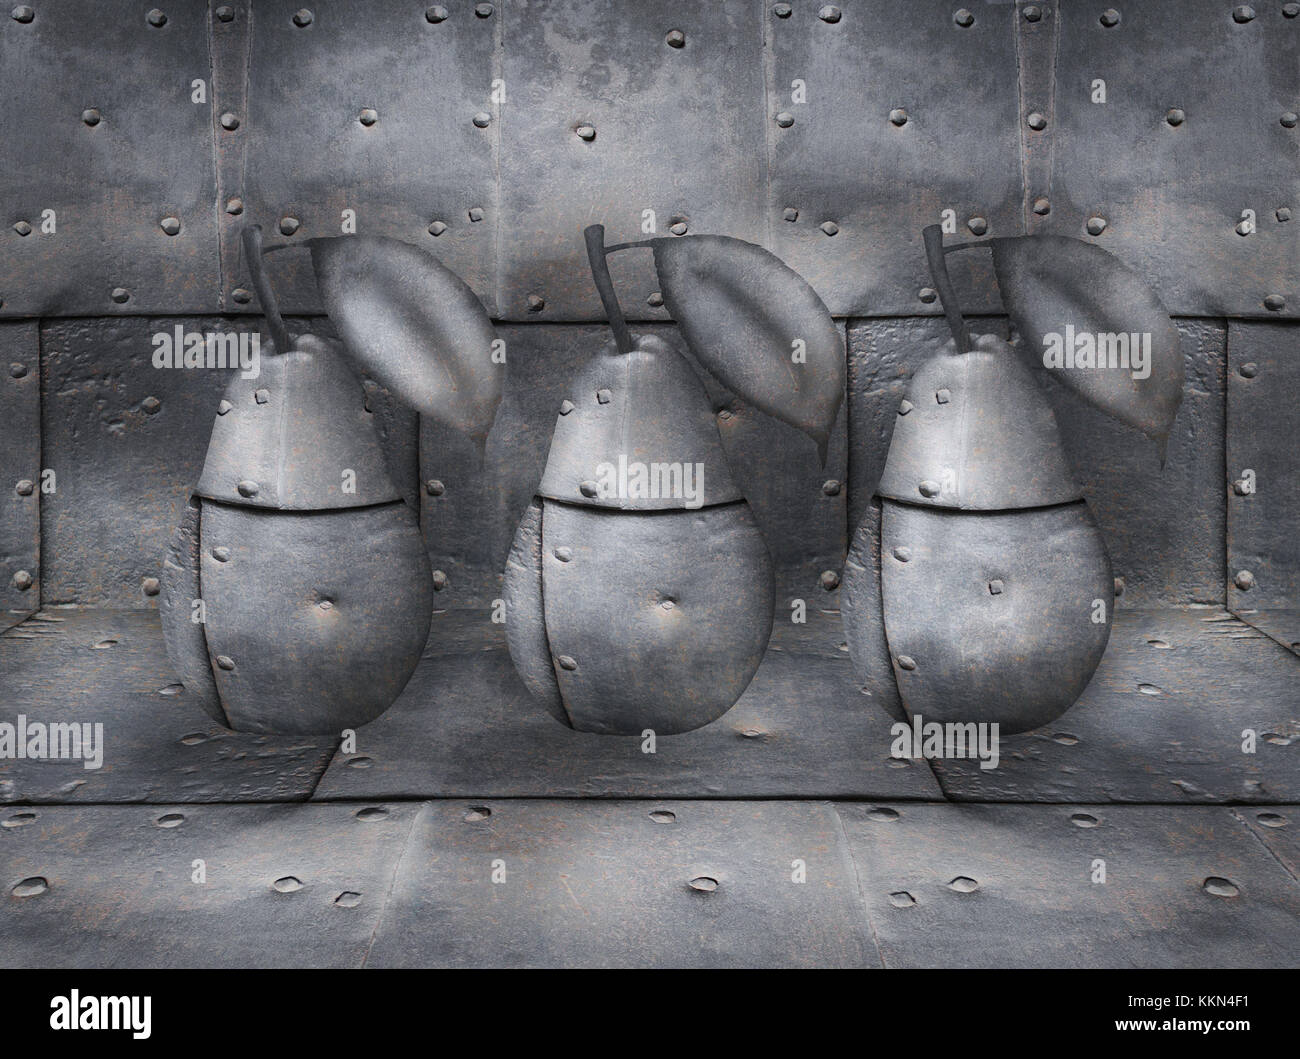 Three pears metal with bolts with background and flooring always in the same material Stock Photo